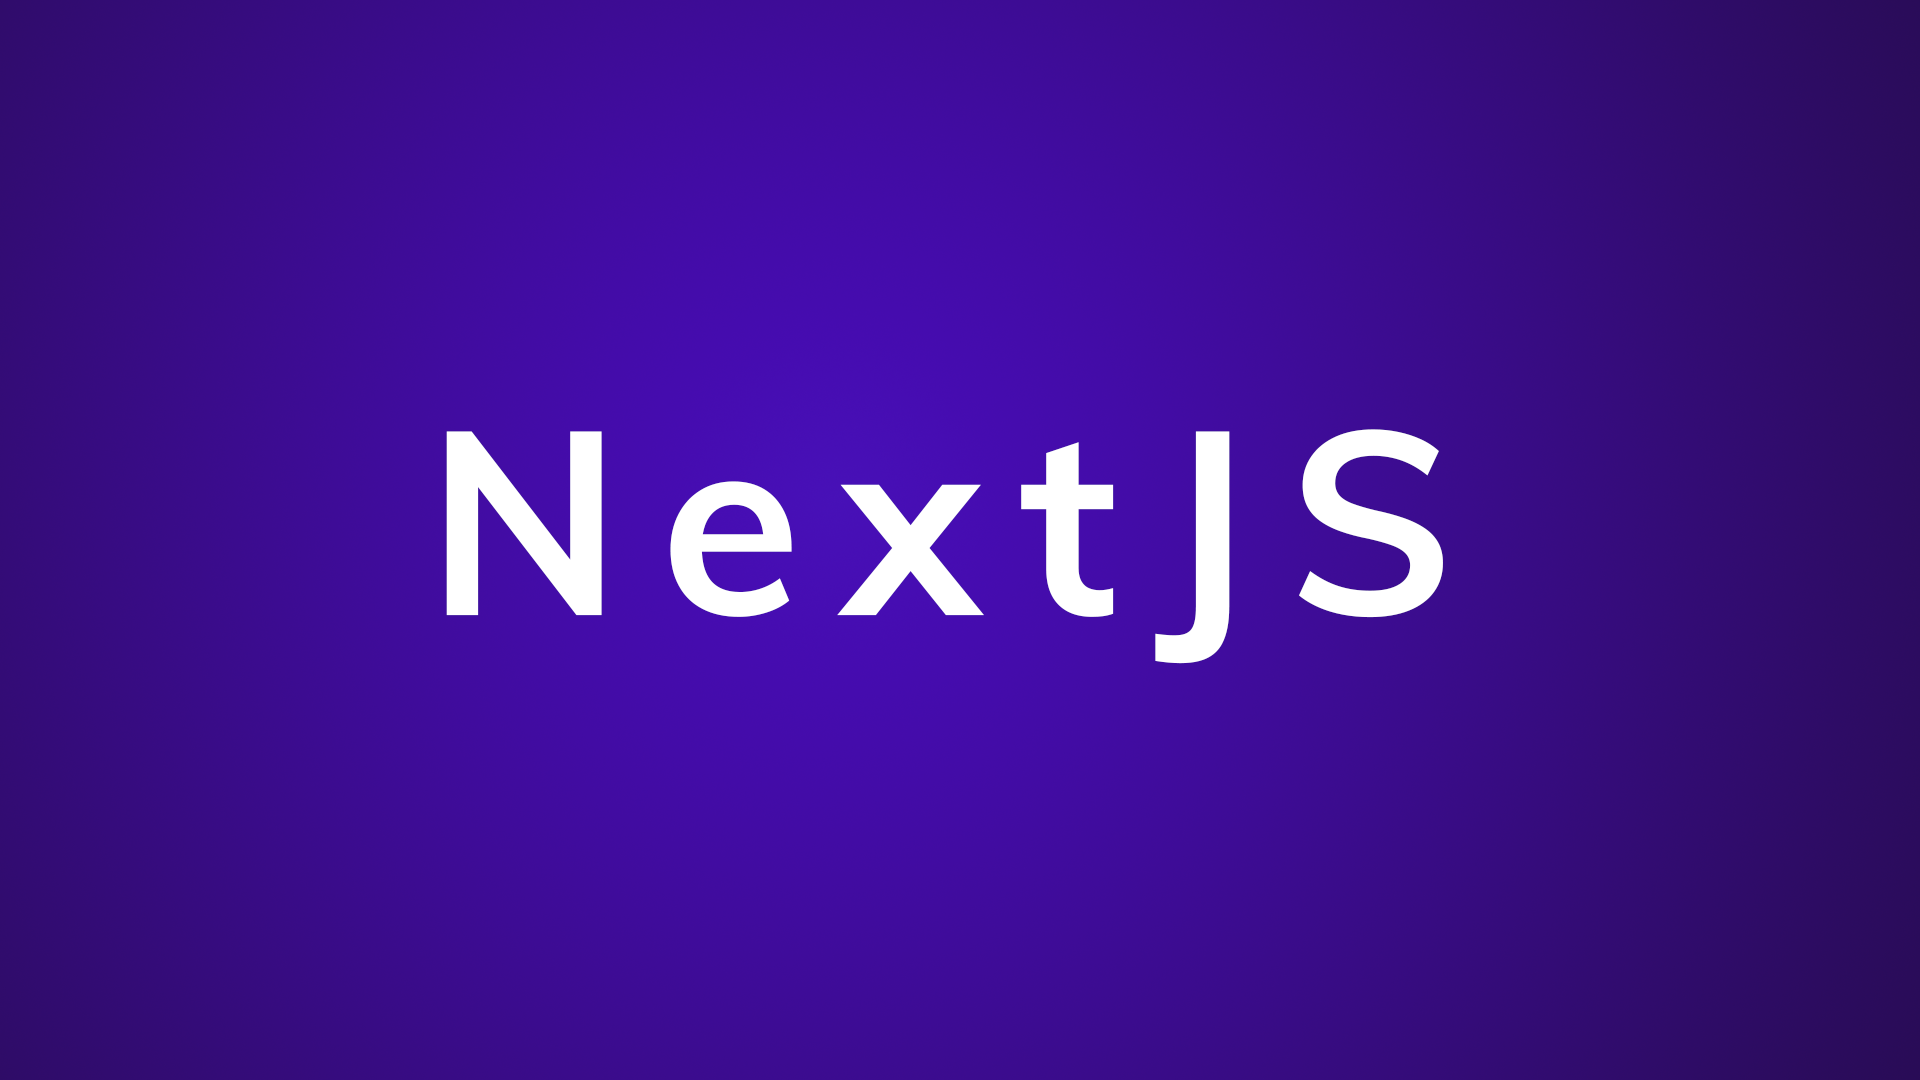 What I Can Do With Markdown in Nextjs